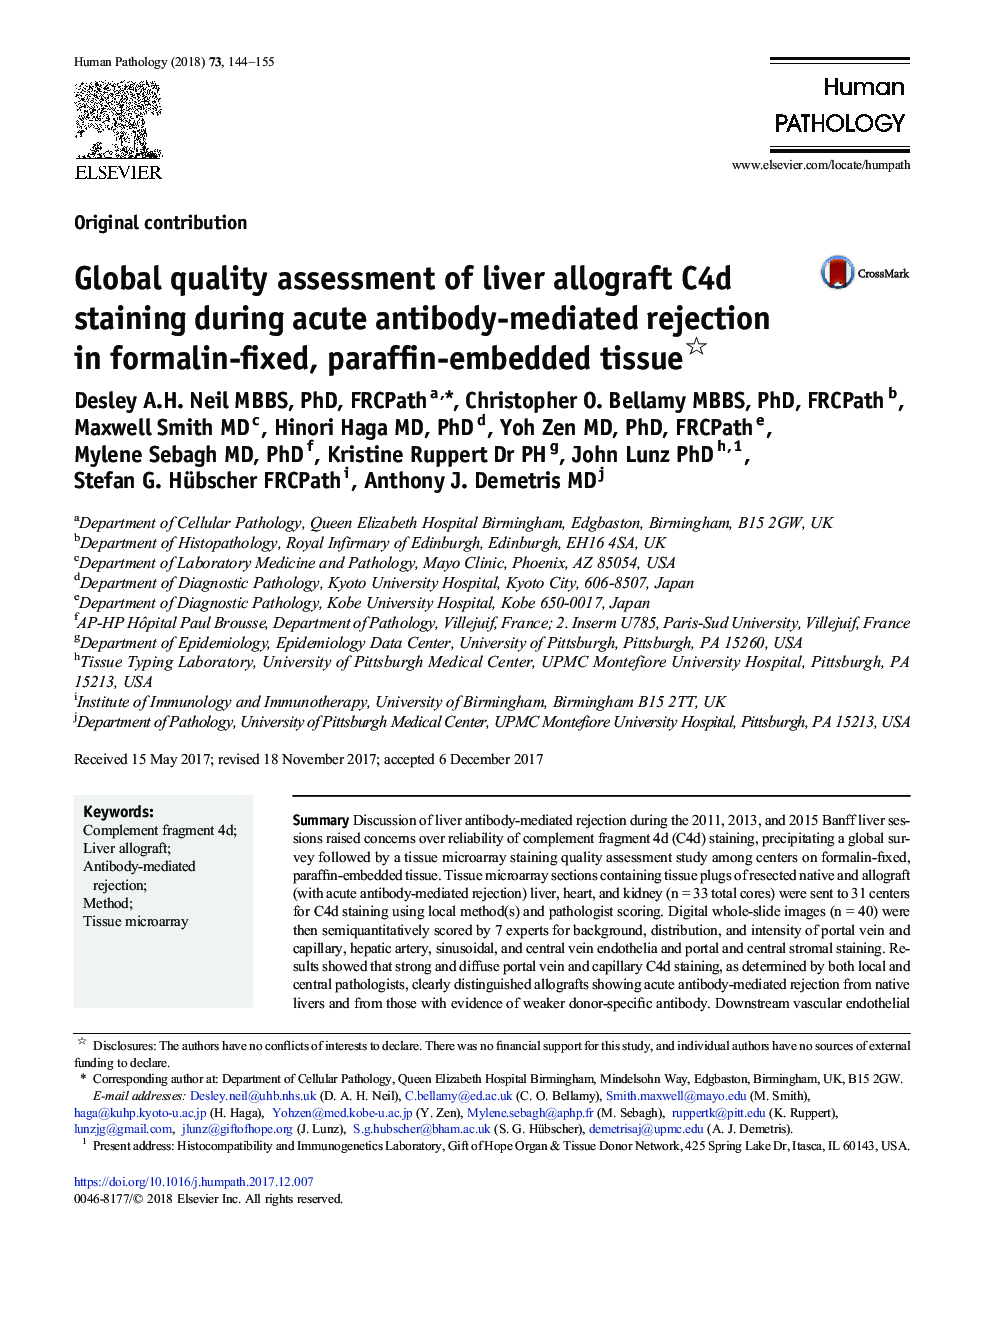 Global quality assessment of liver allograft C4d staining during acute antibody-mediated rejection in formalin-fixed, paraffin-embedded tissue